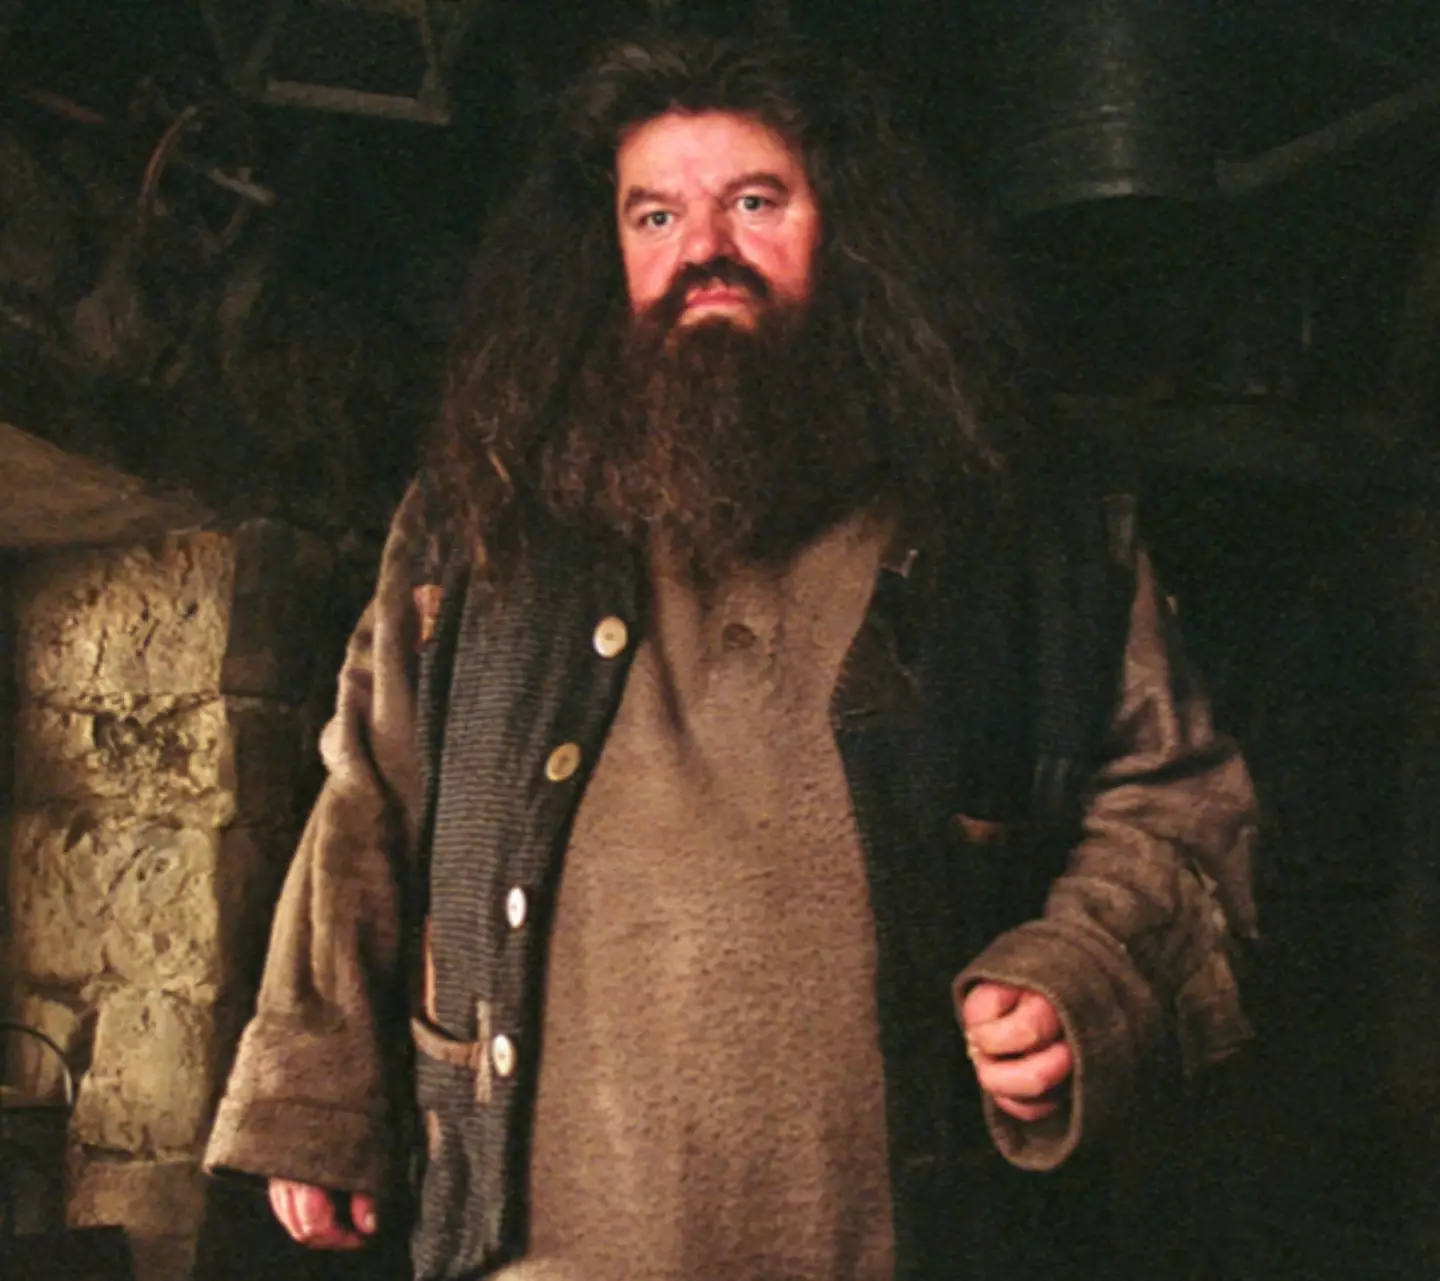 Coltrane starred as Hagrid in the Harry Potter series.